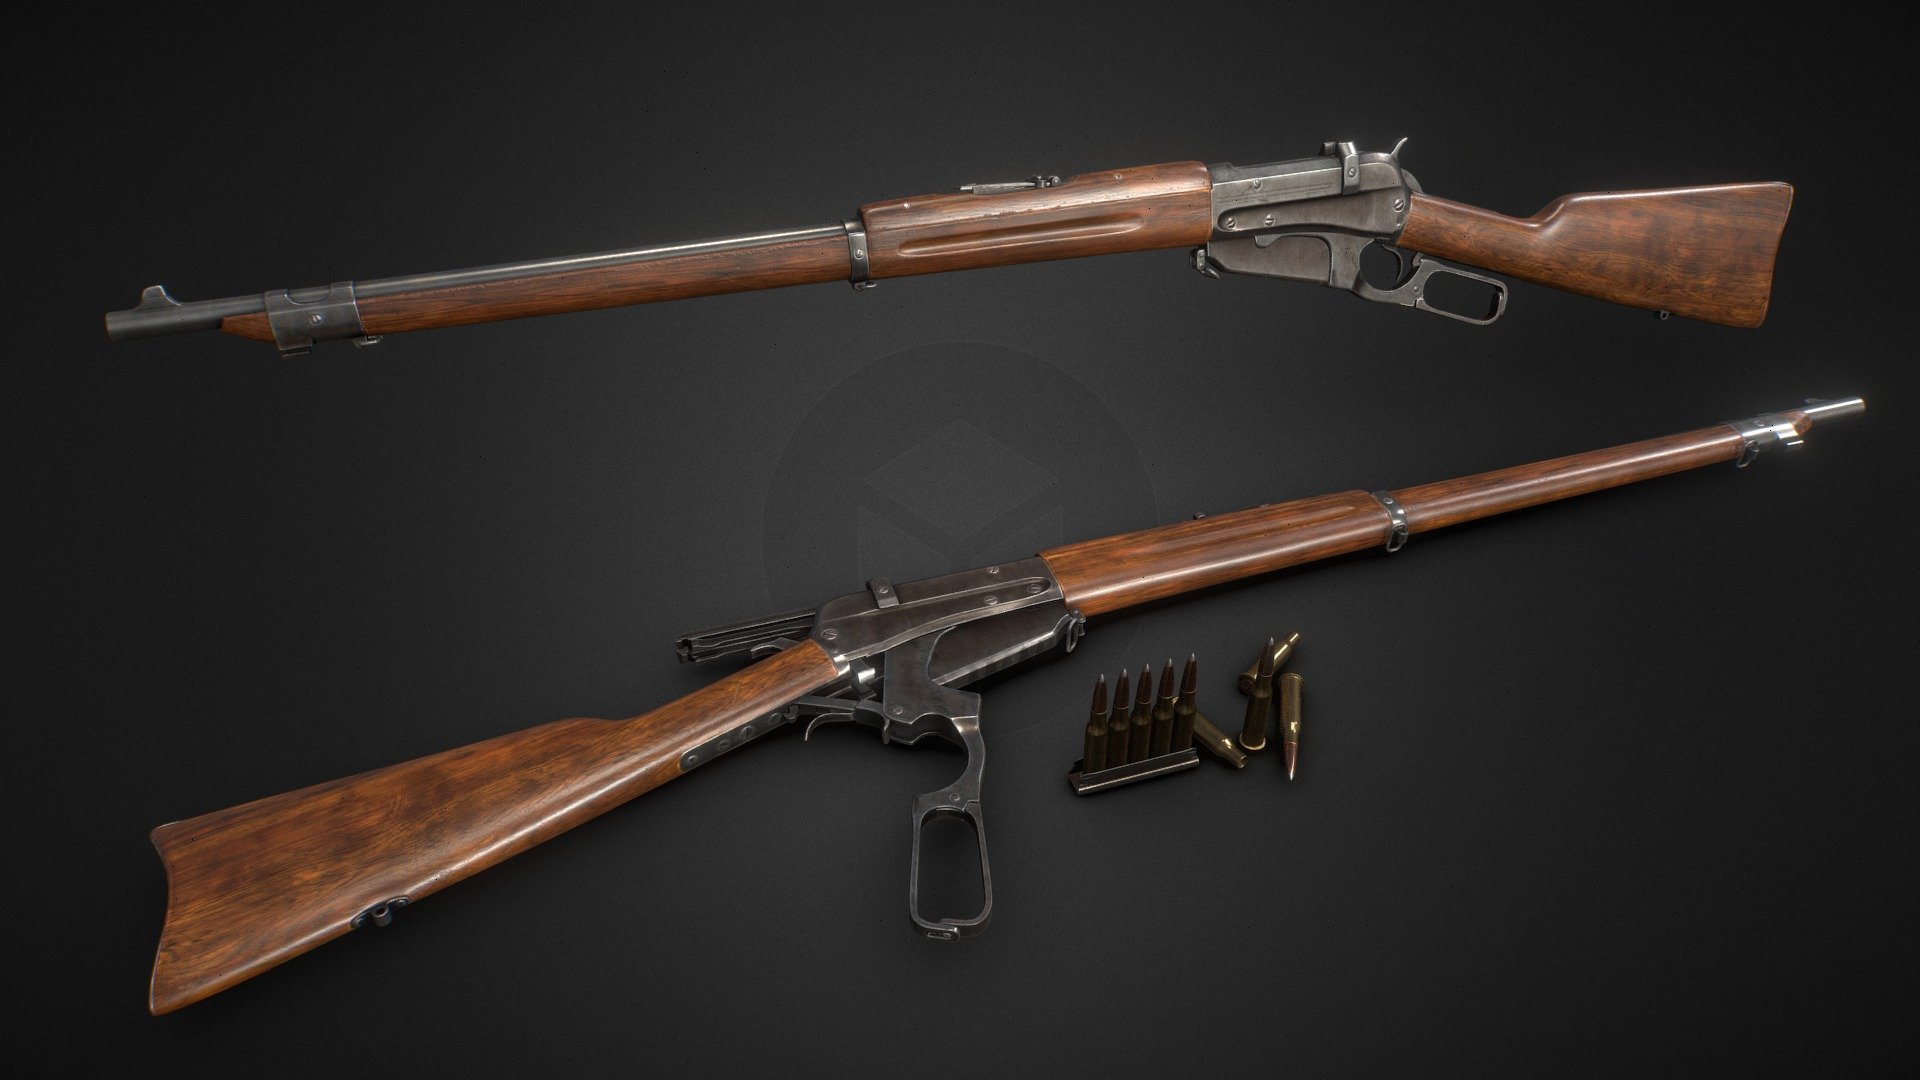 Winchester low poly model

4k (1k for ammo) textures. Total polycount 16199 tris.

9 separate moving parts ready for rig and animation

Model created on Blender and ZBrush. Textured with Substance Painter 3d model